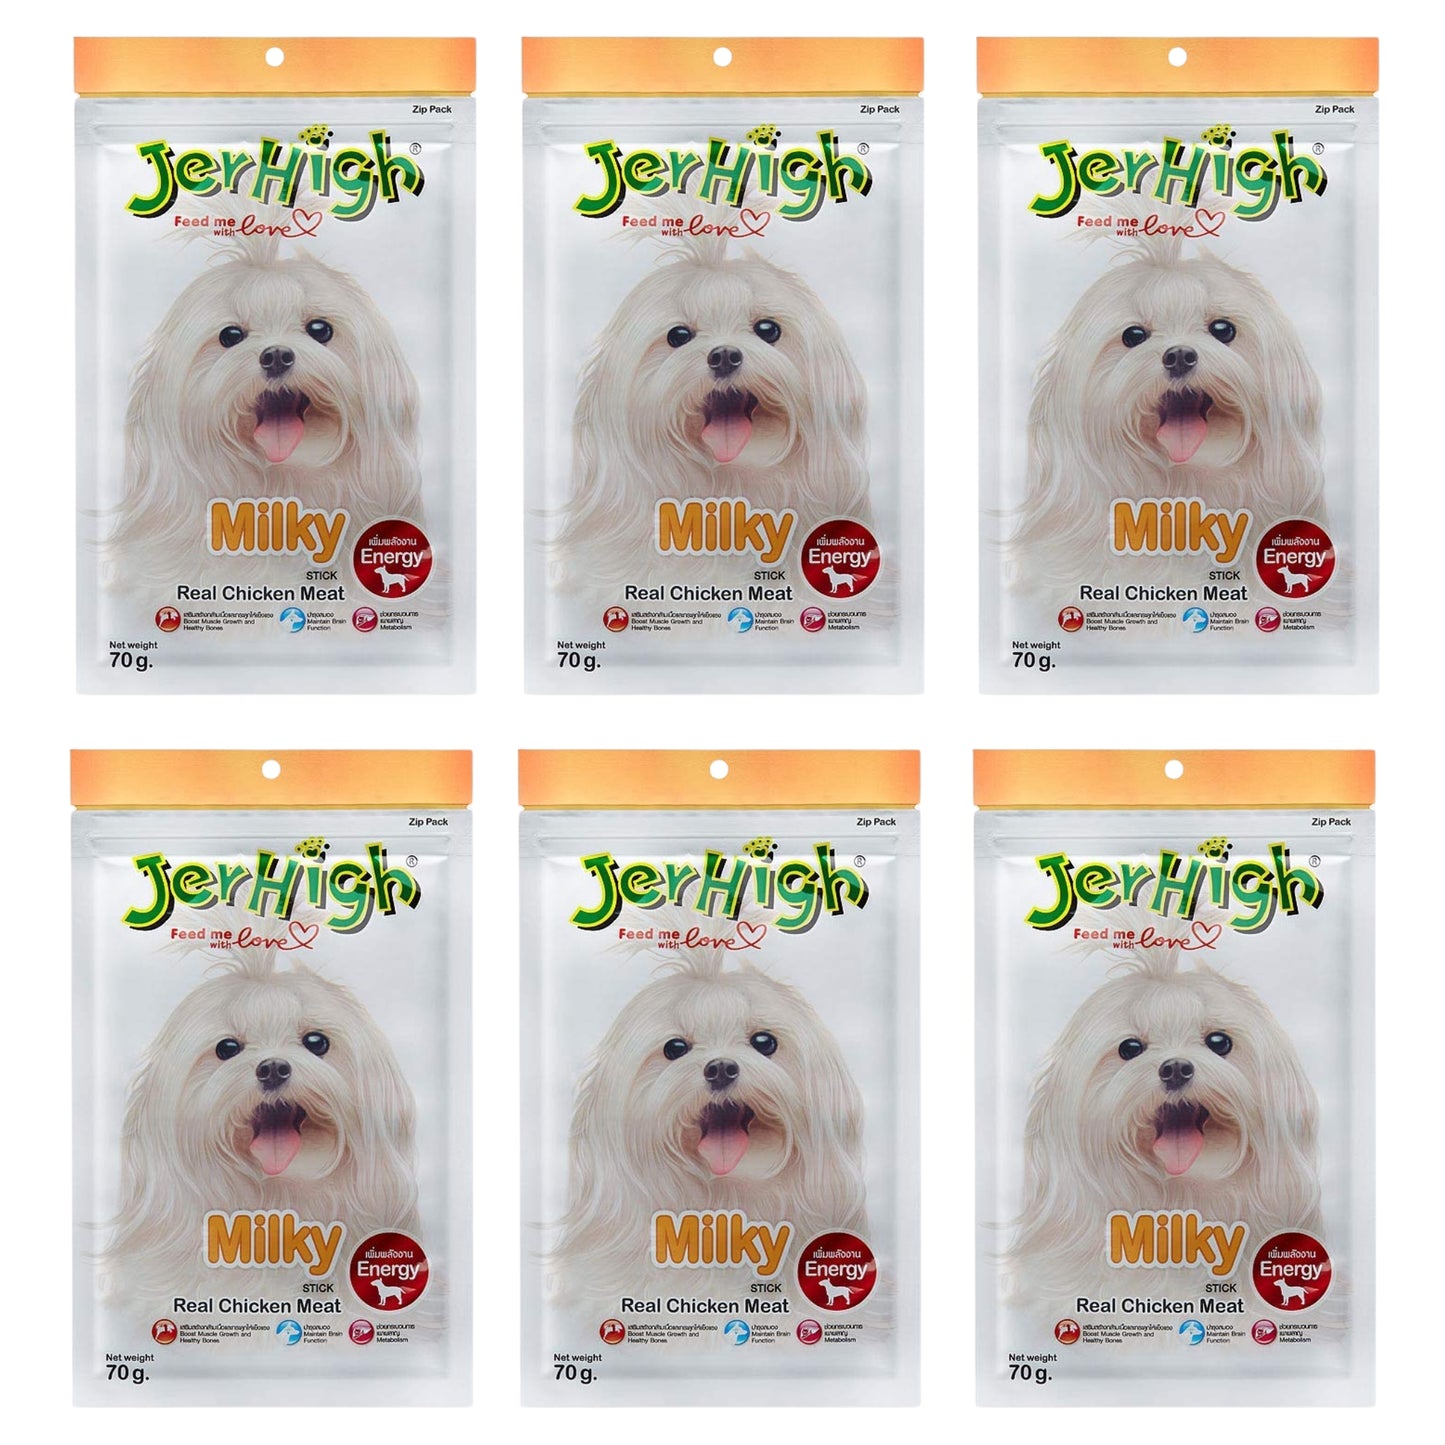 JerHigh Milky Stick Dog Treat with Real Chicken Meat - 70gm, Pack of 6